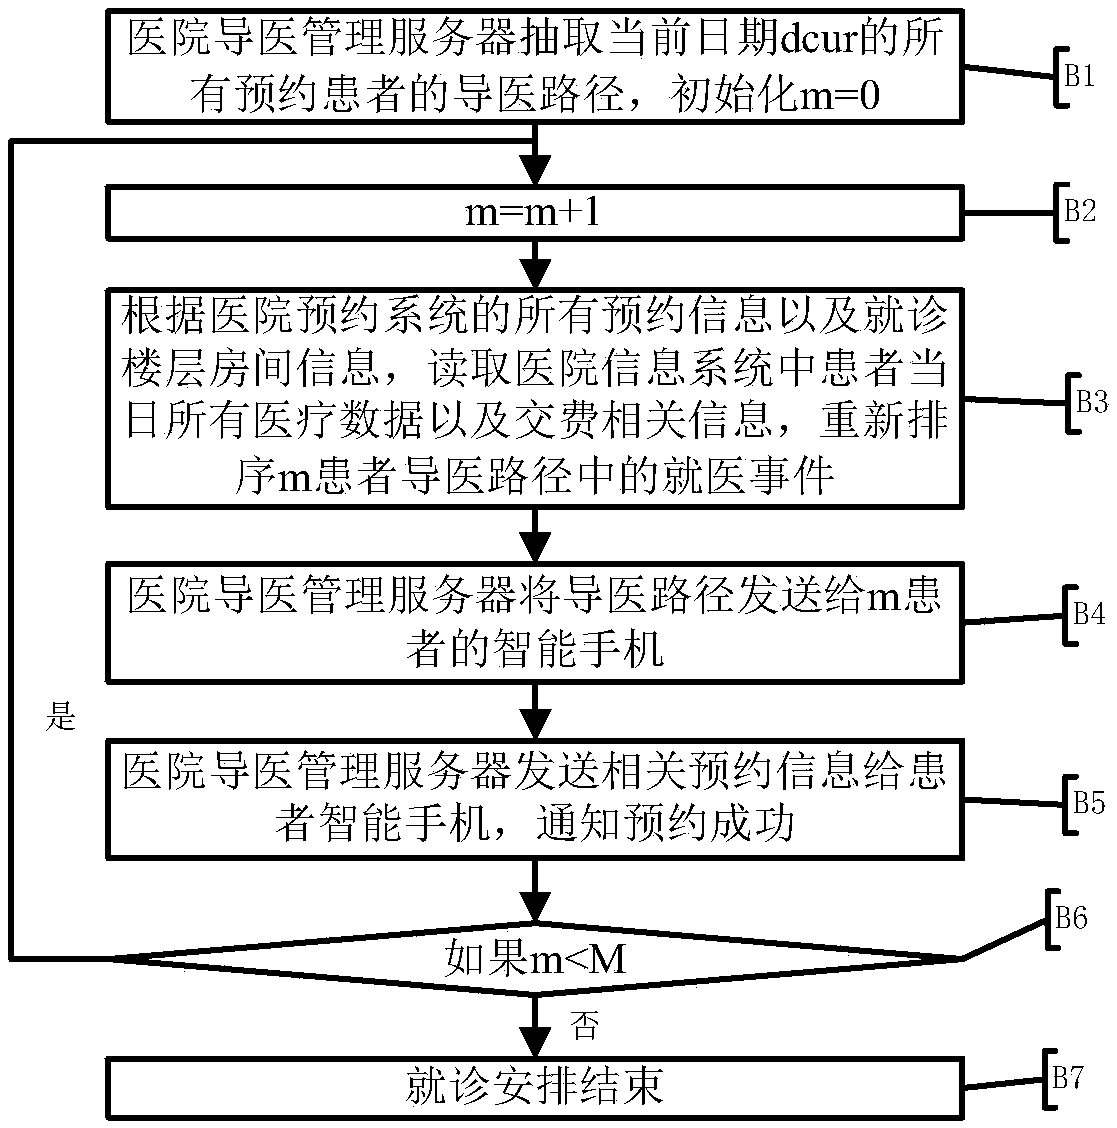 Hospital intelligent medical guiding device and method